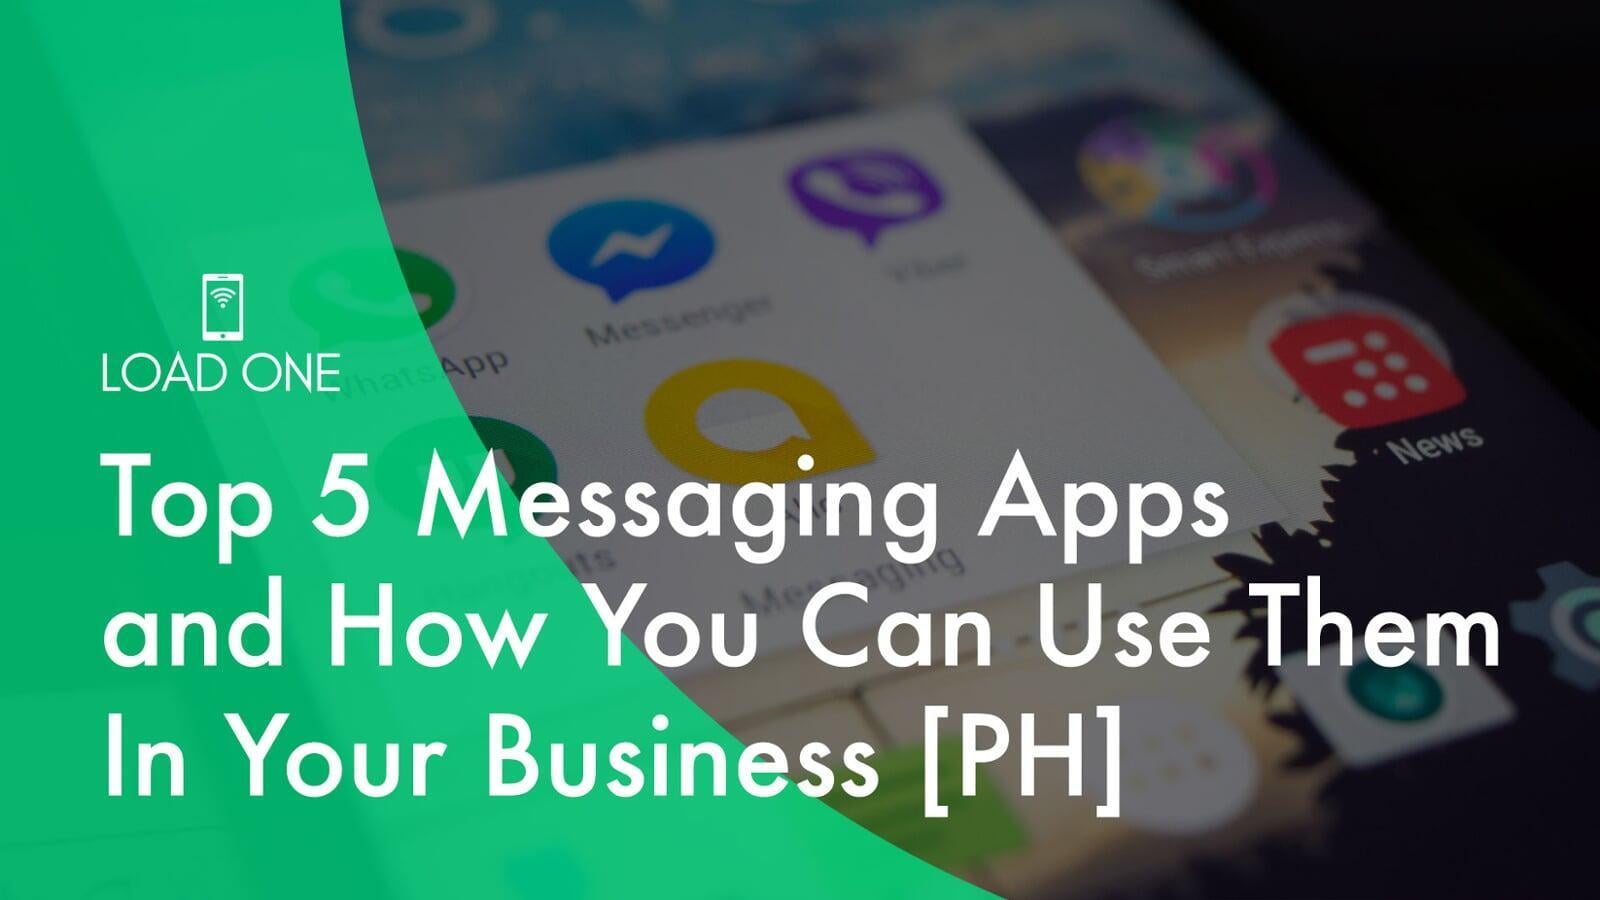 Top 5 Messaging Apps and How You Can Use Them In Your Business [PH]